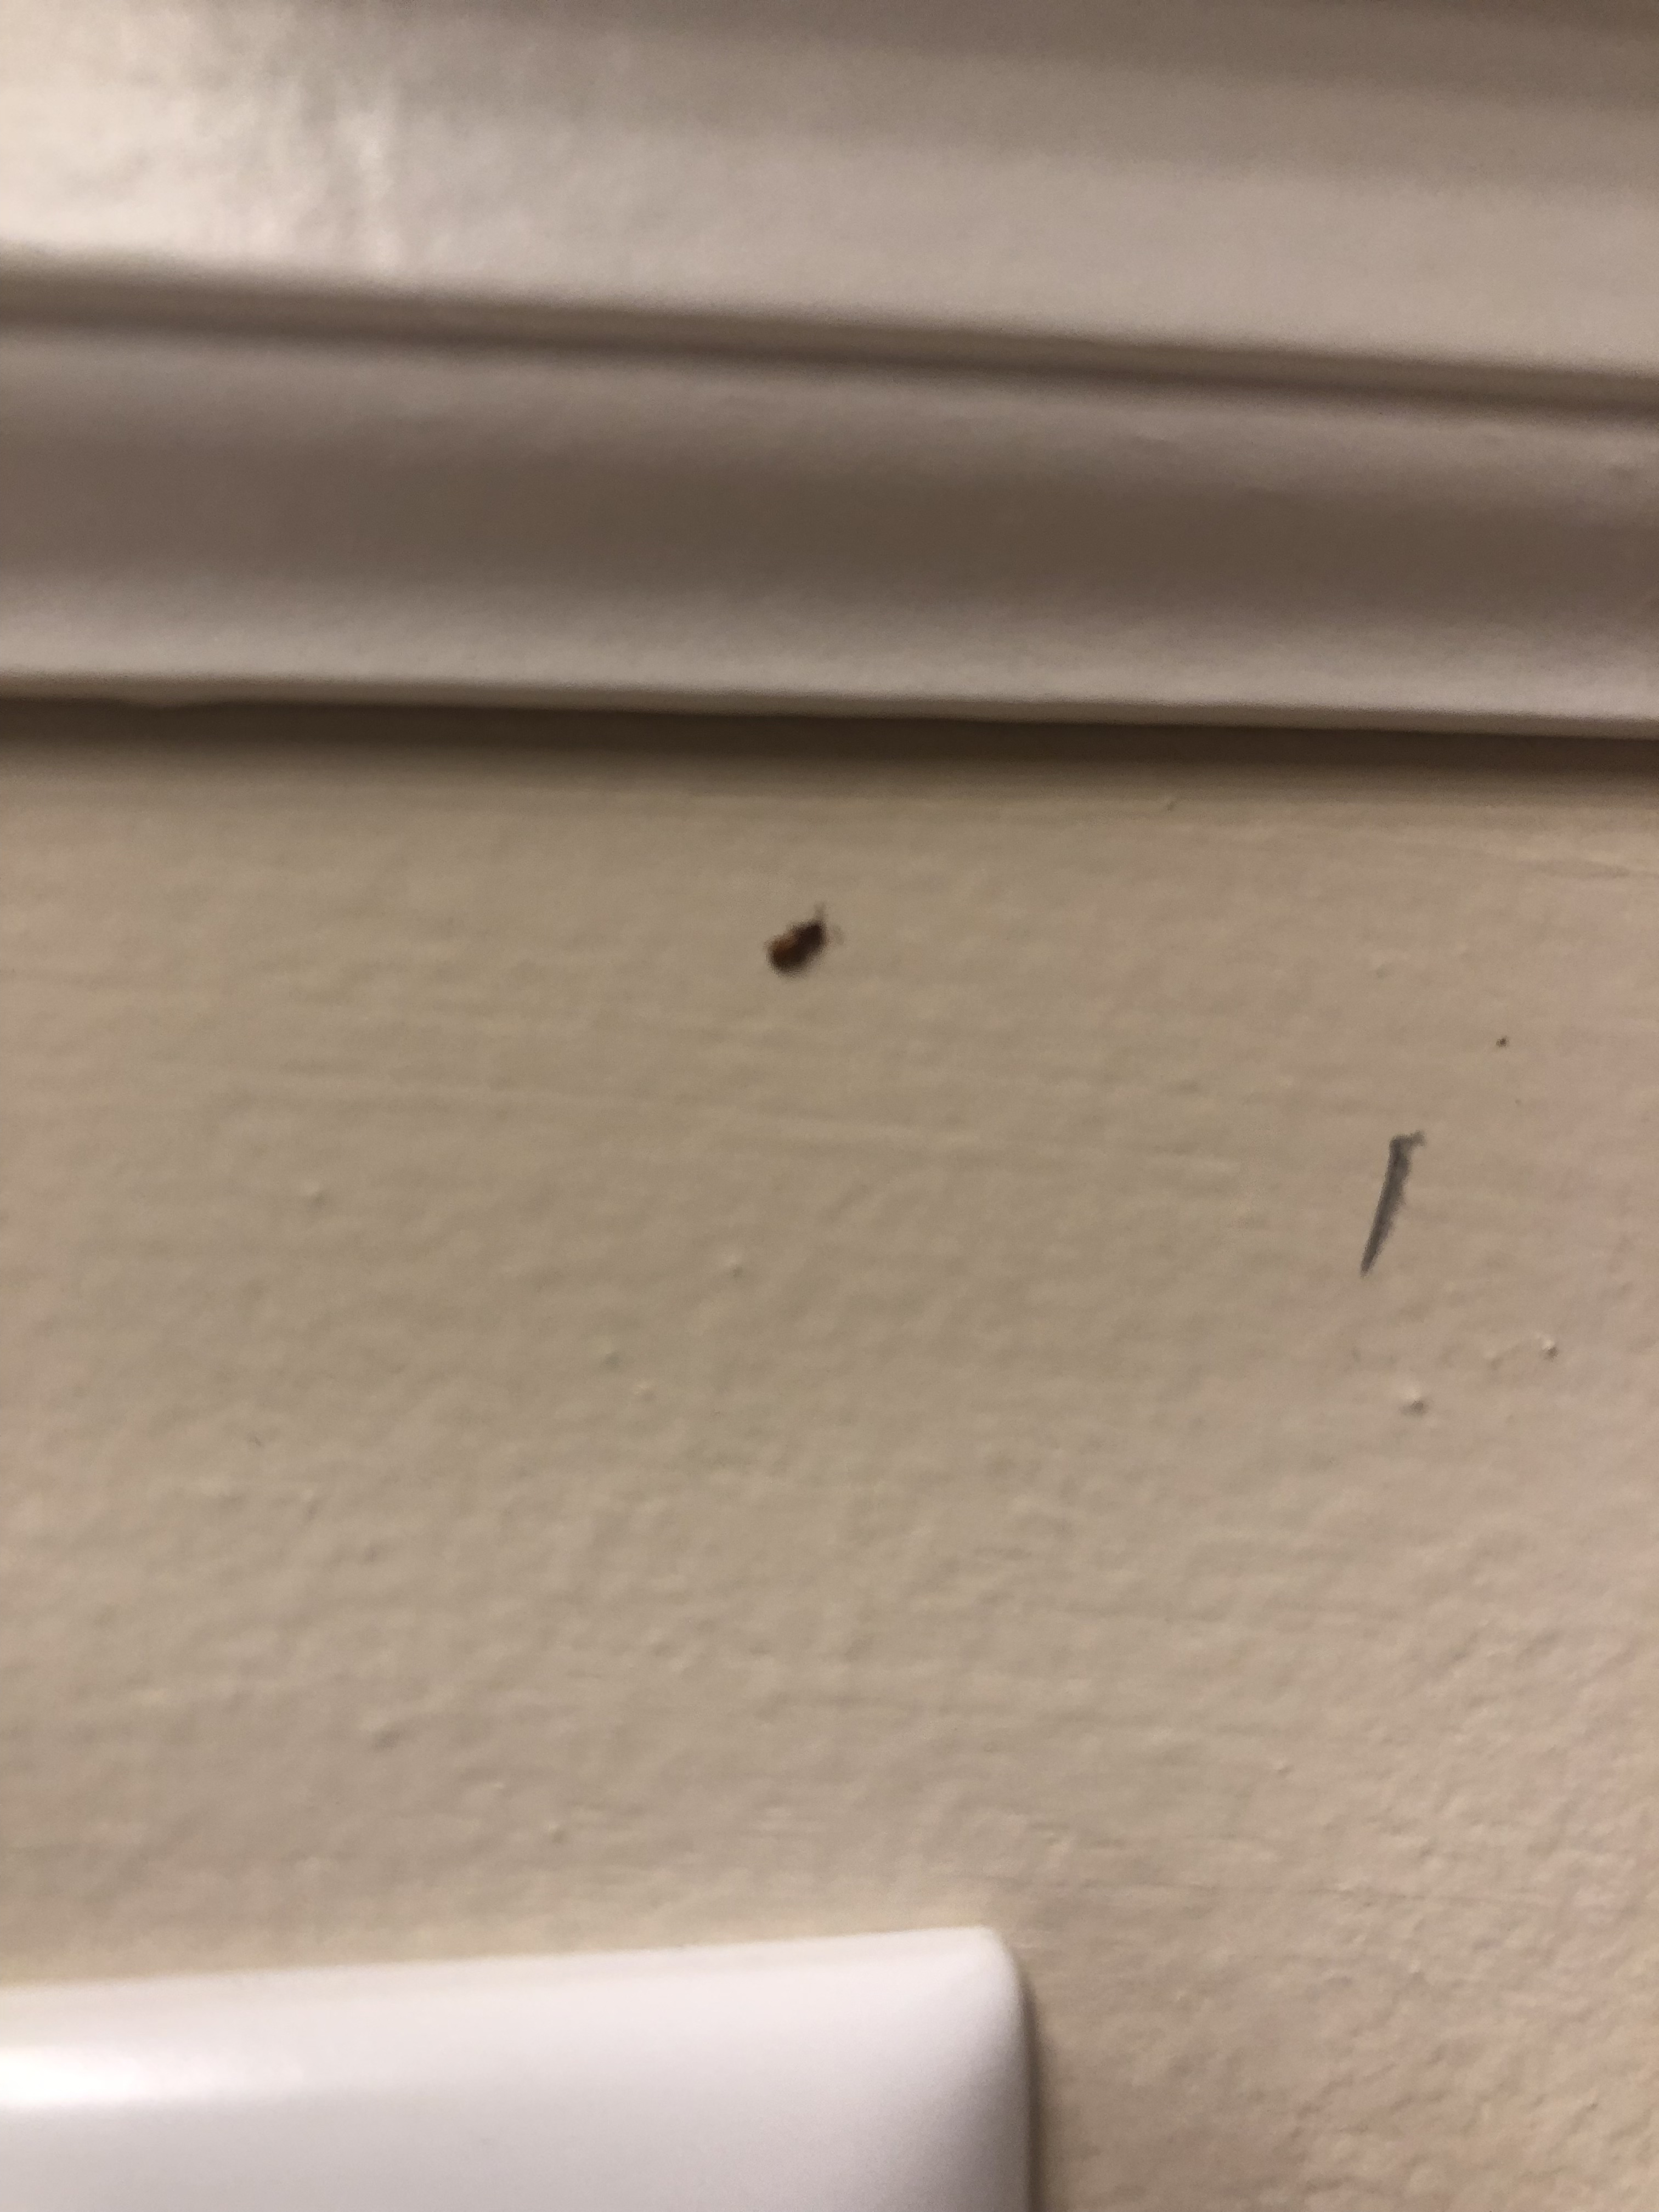 What Are These Tiny Brown Flying Bugs In My House | Psoriasisguru.com